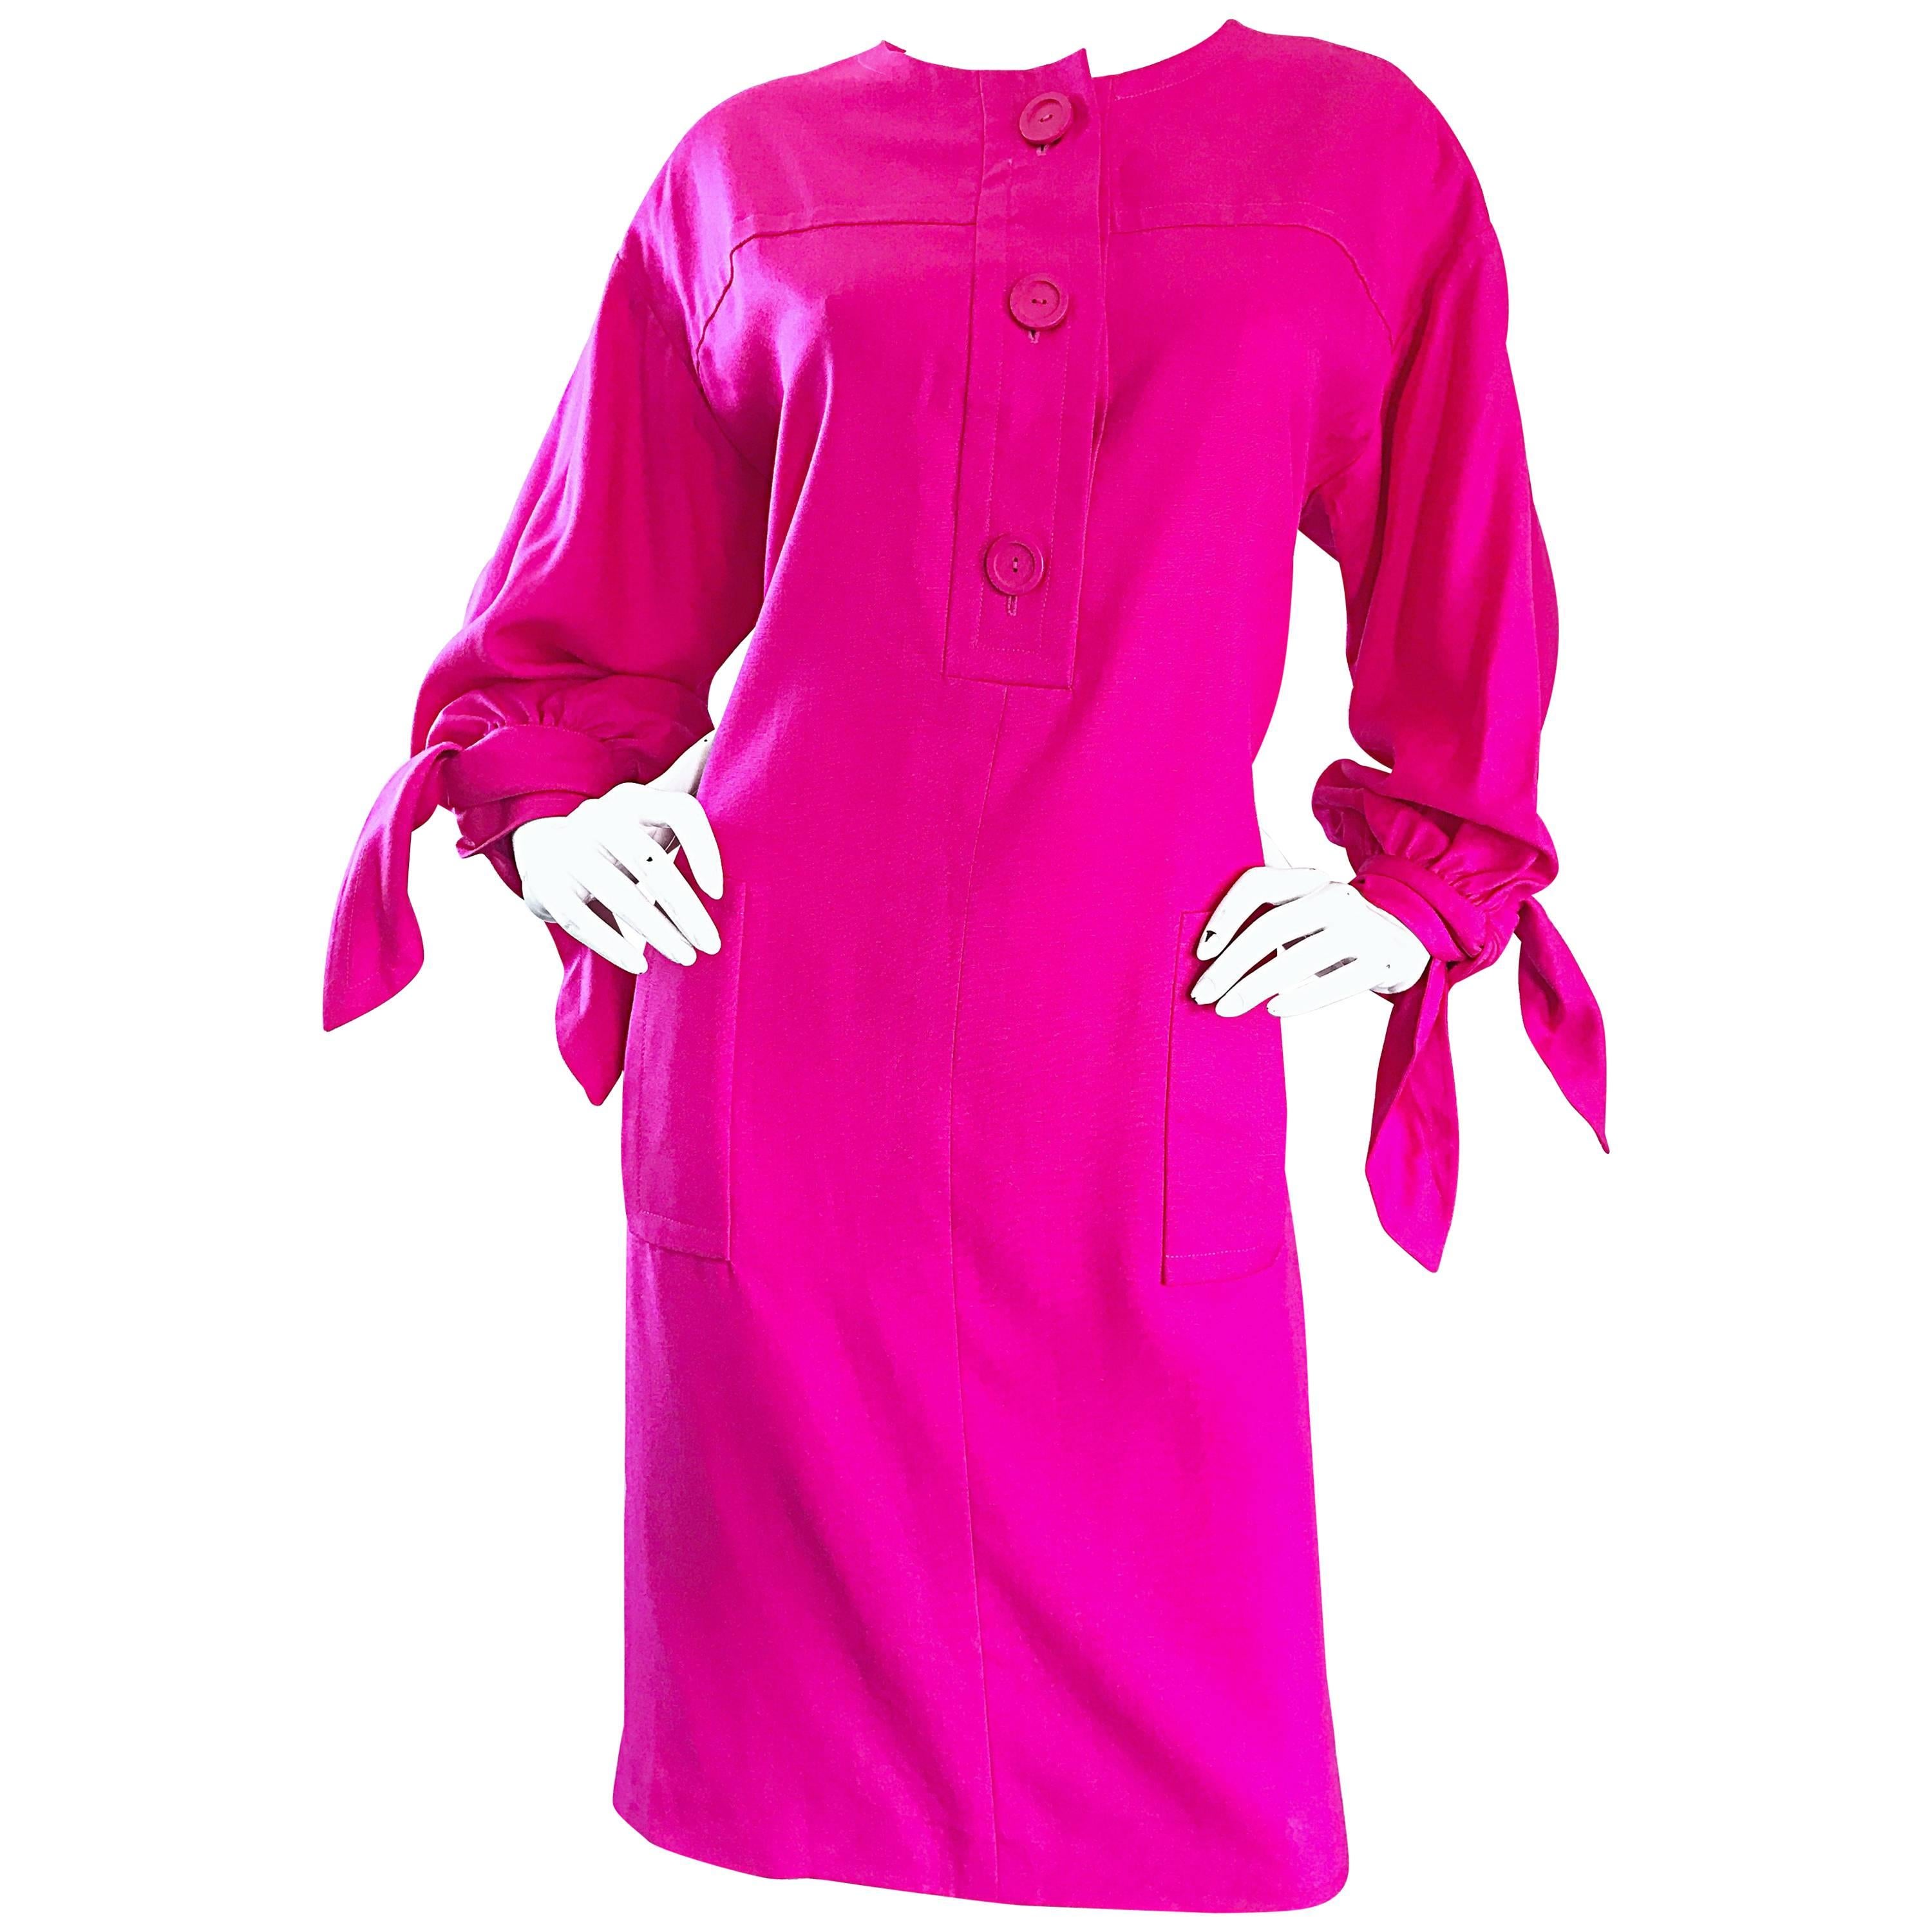 Vintage Givenchy Hot Pink Size 18 Fuchsia Alexander McQueen Cocktail Dress